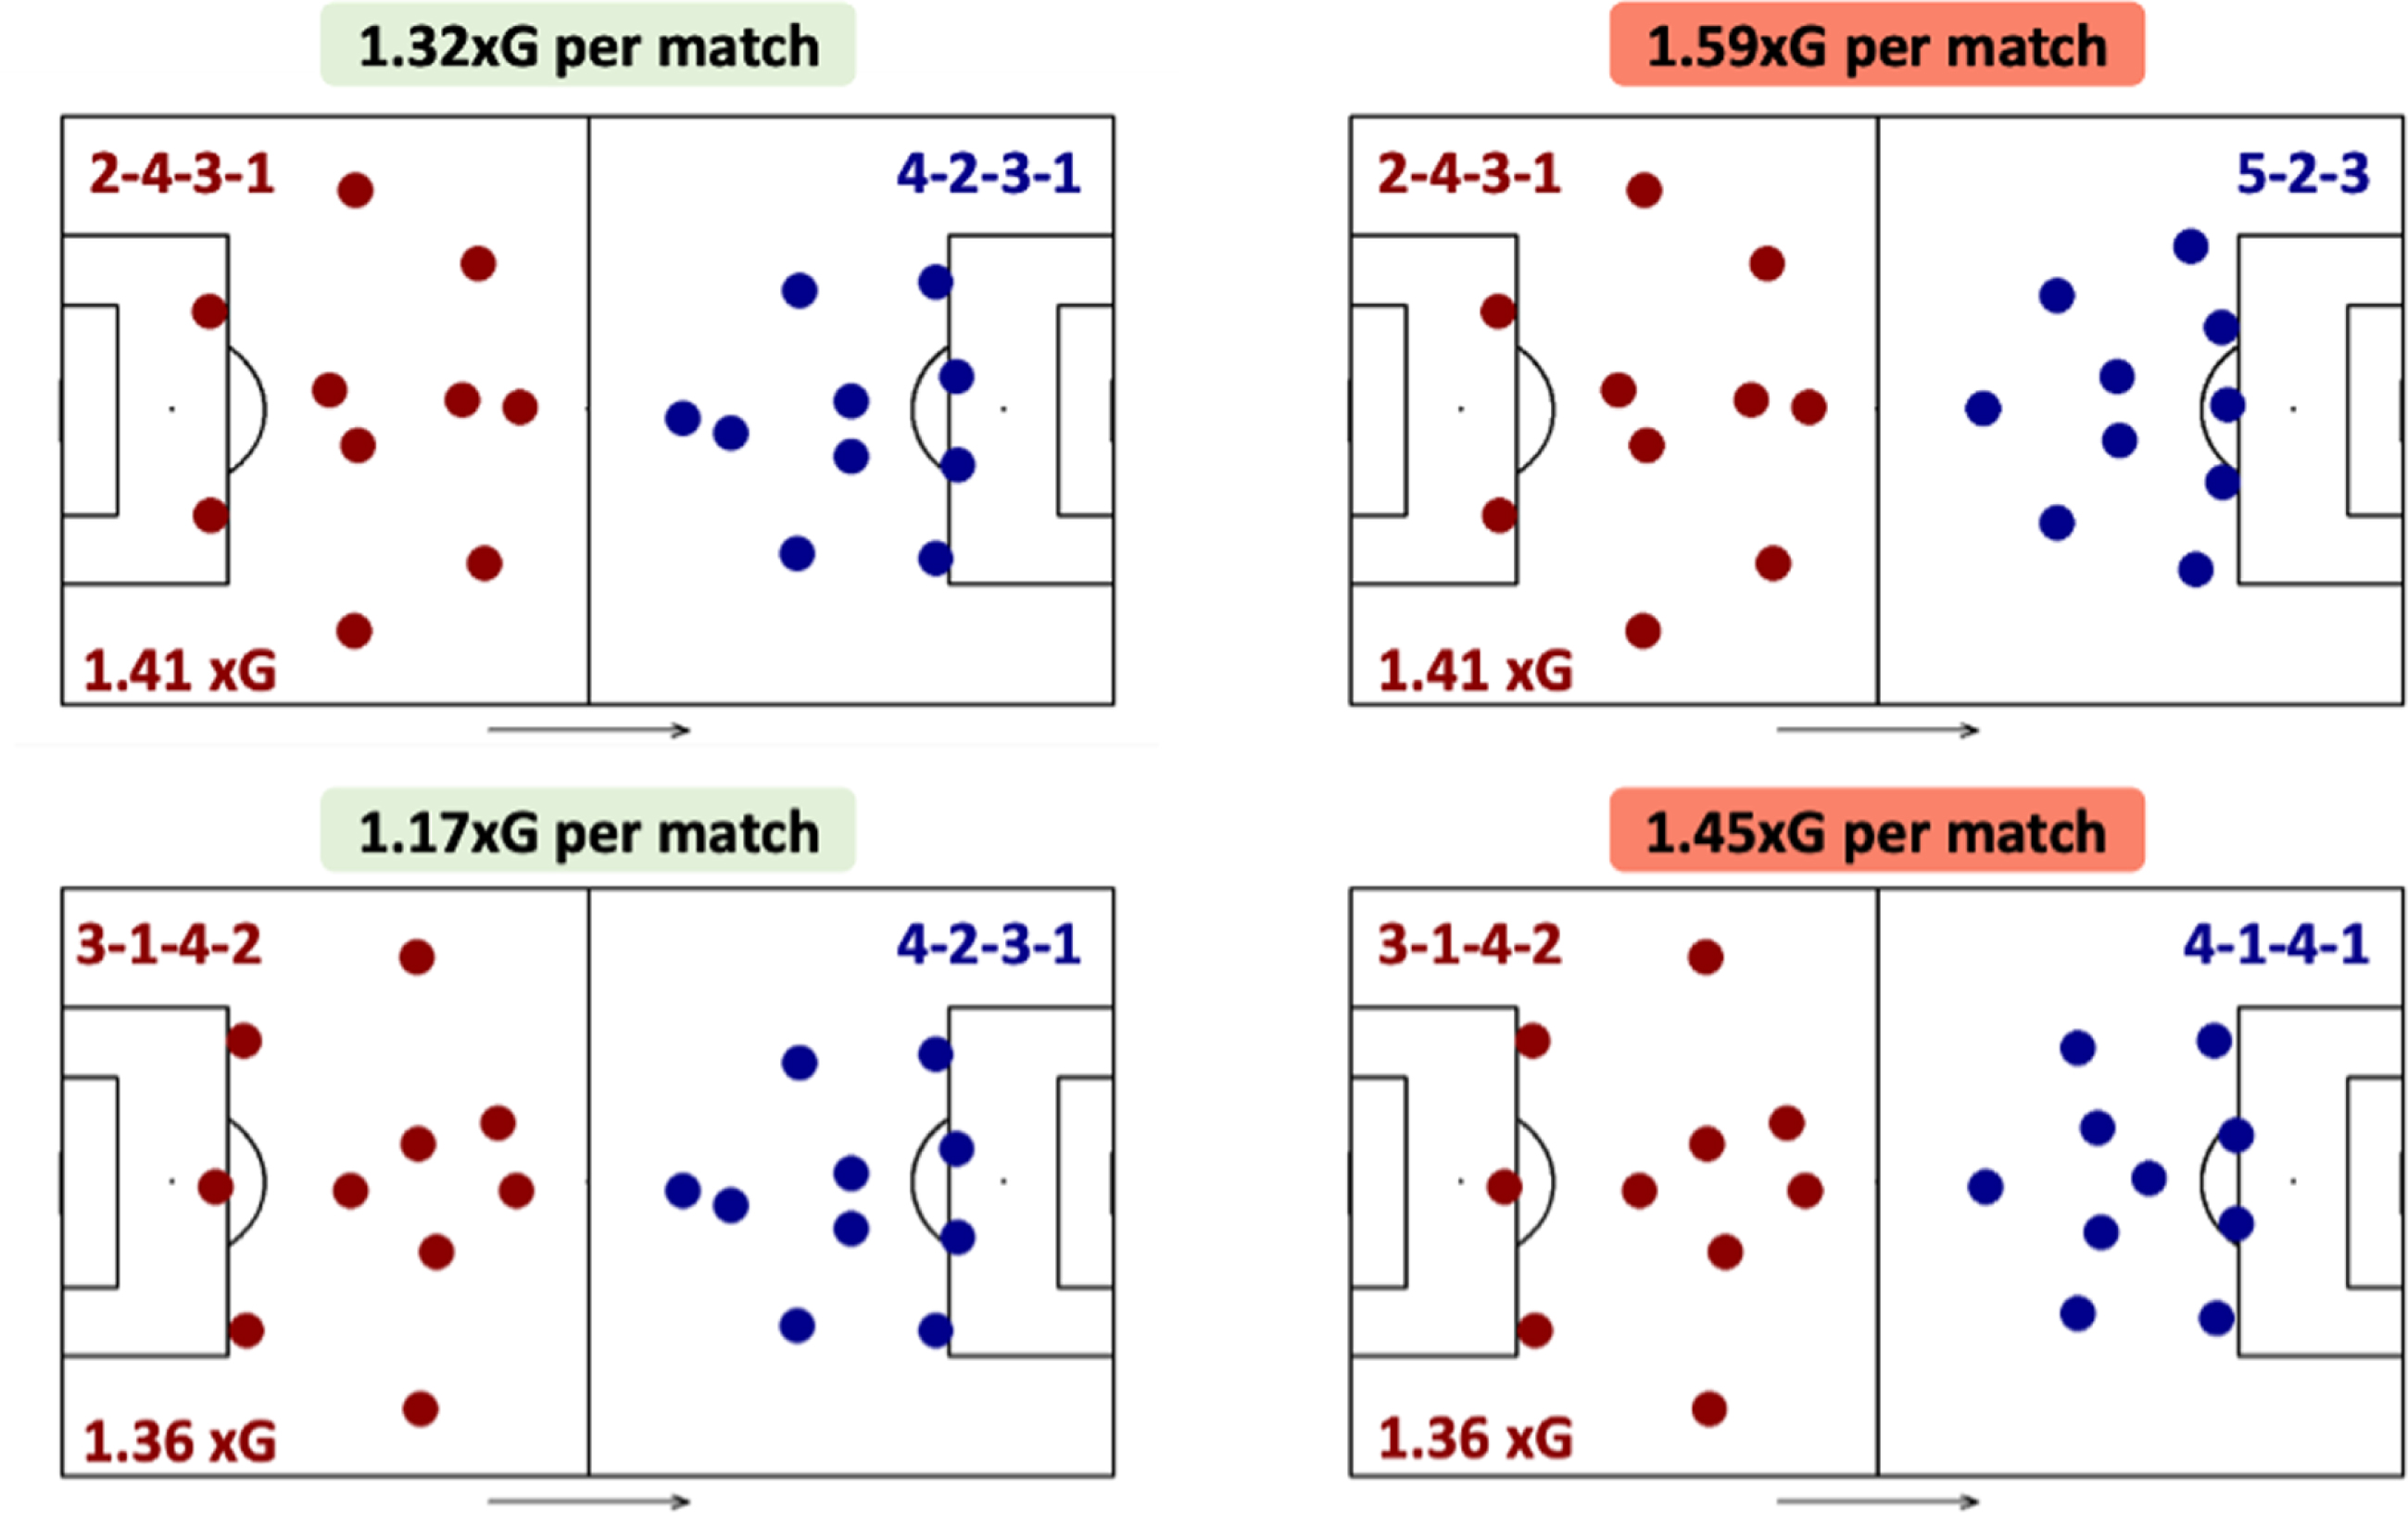 Effectiveness of defensive formations (blue) against two (upper) and three (lower) player build-up (red).